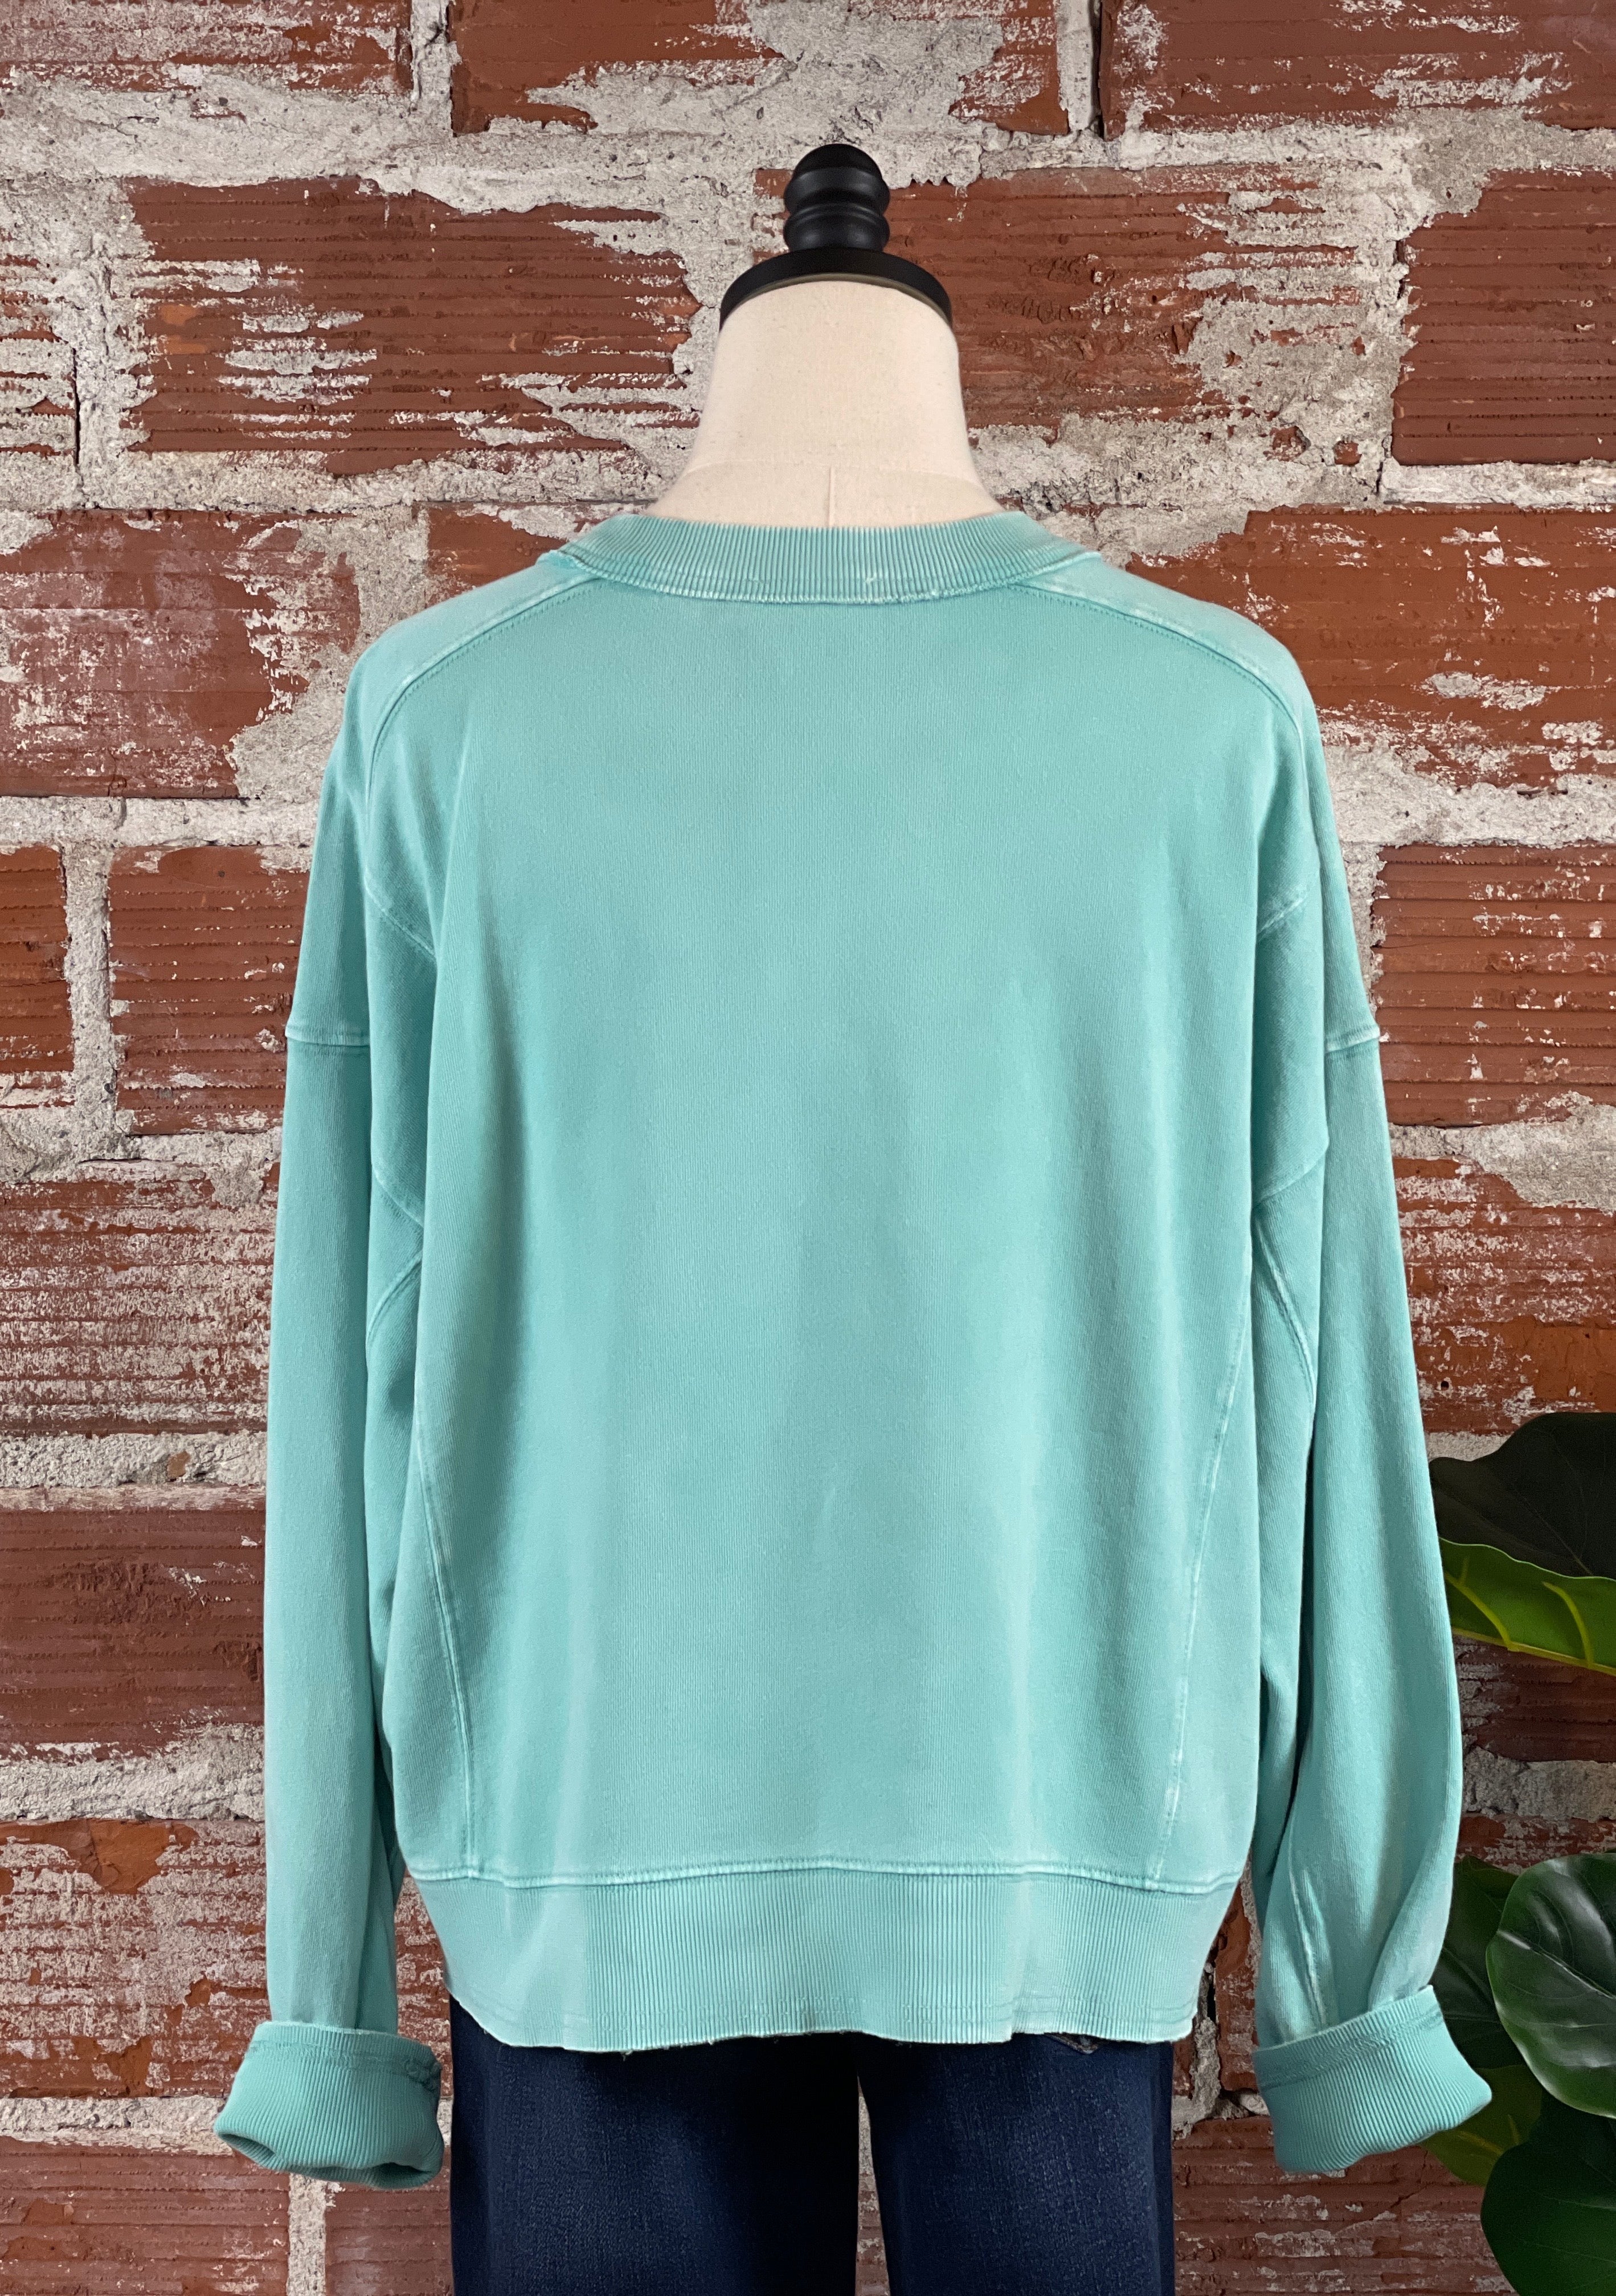 Tracie Mineral Washed Terry Sweatshirt in Aqua-112 Woven Tops - Long Sleeve-Little Bird Boutique